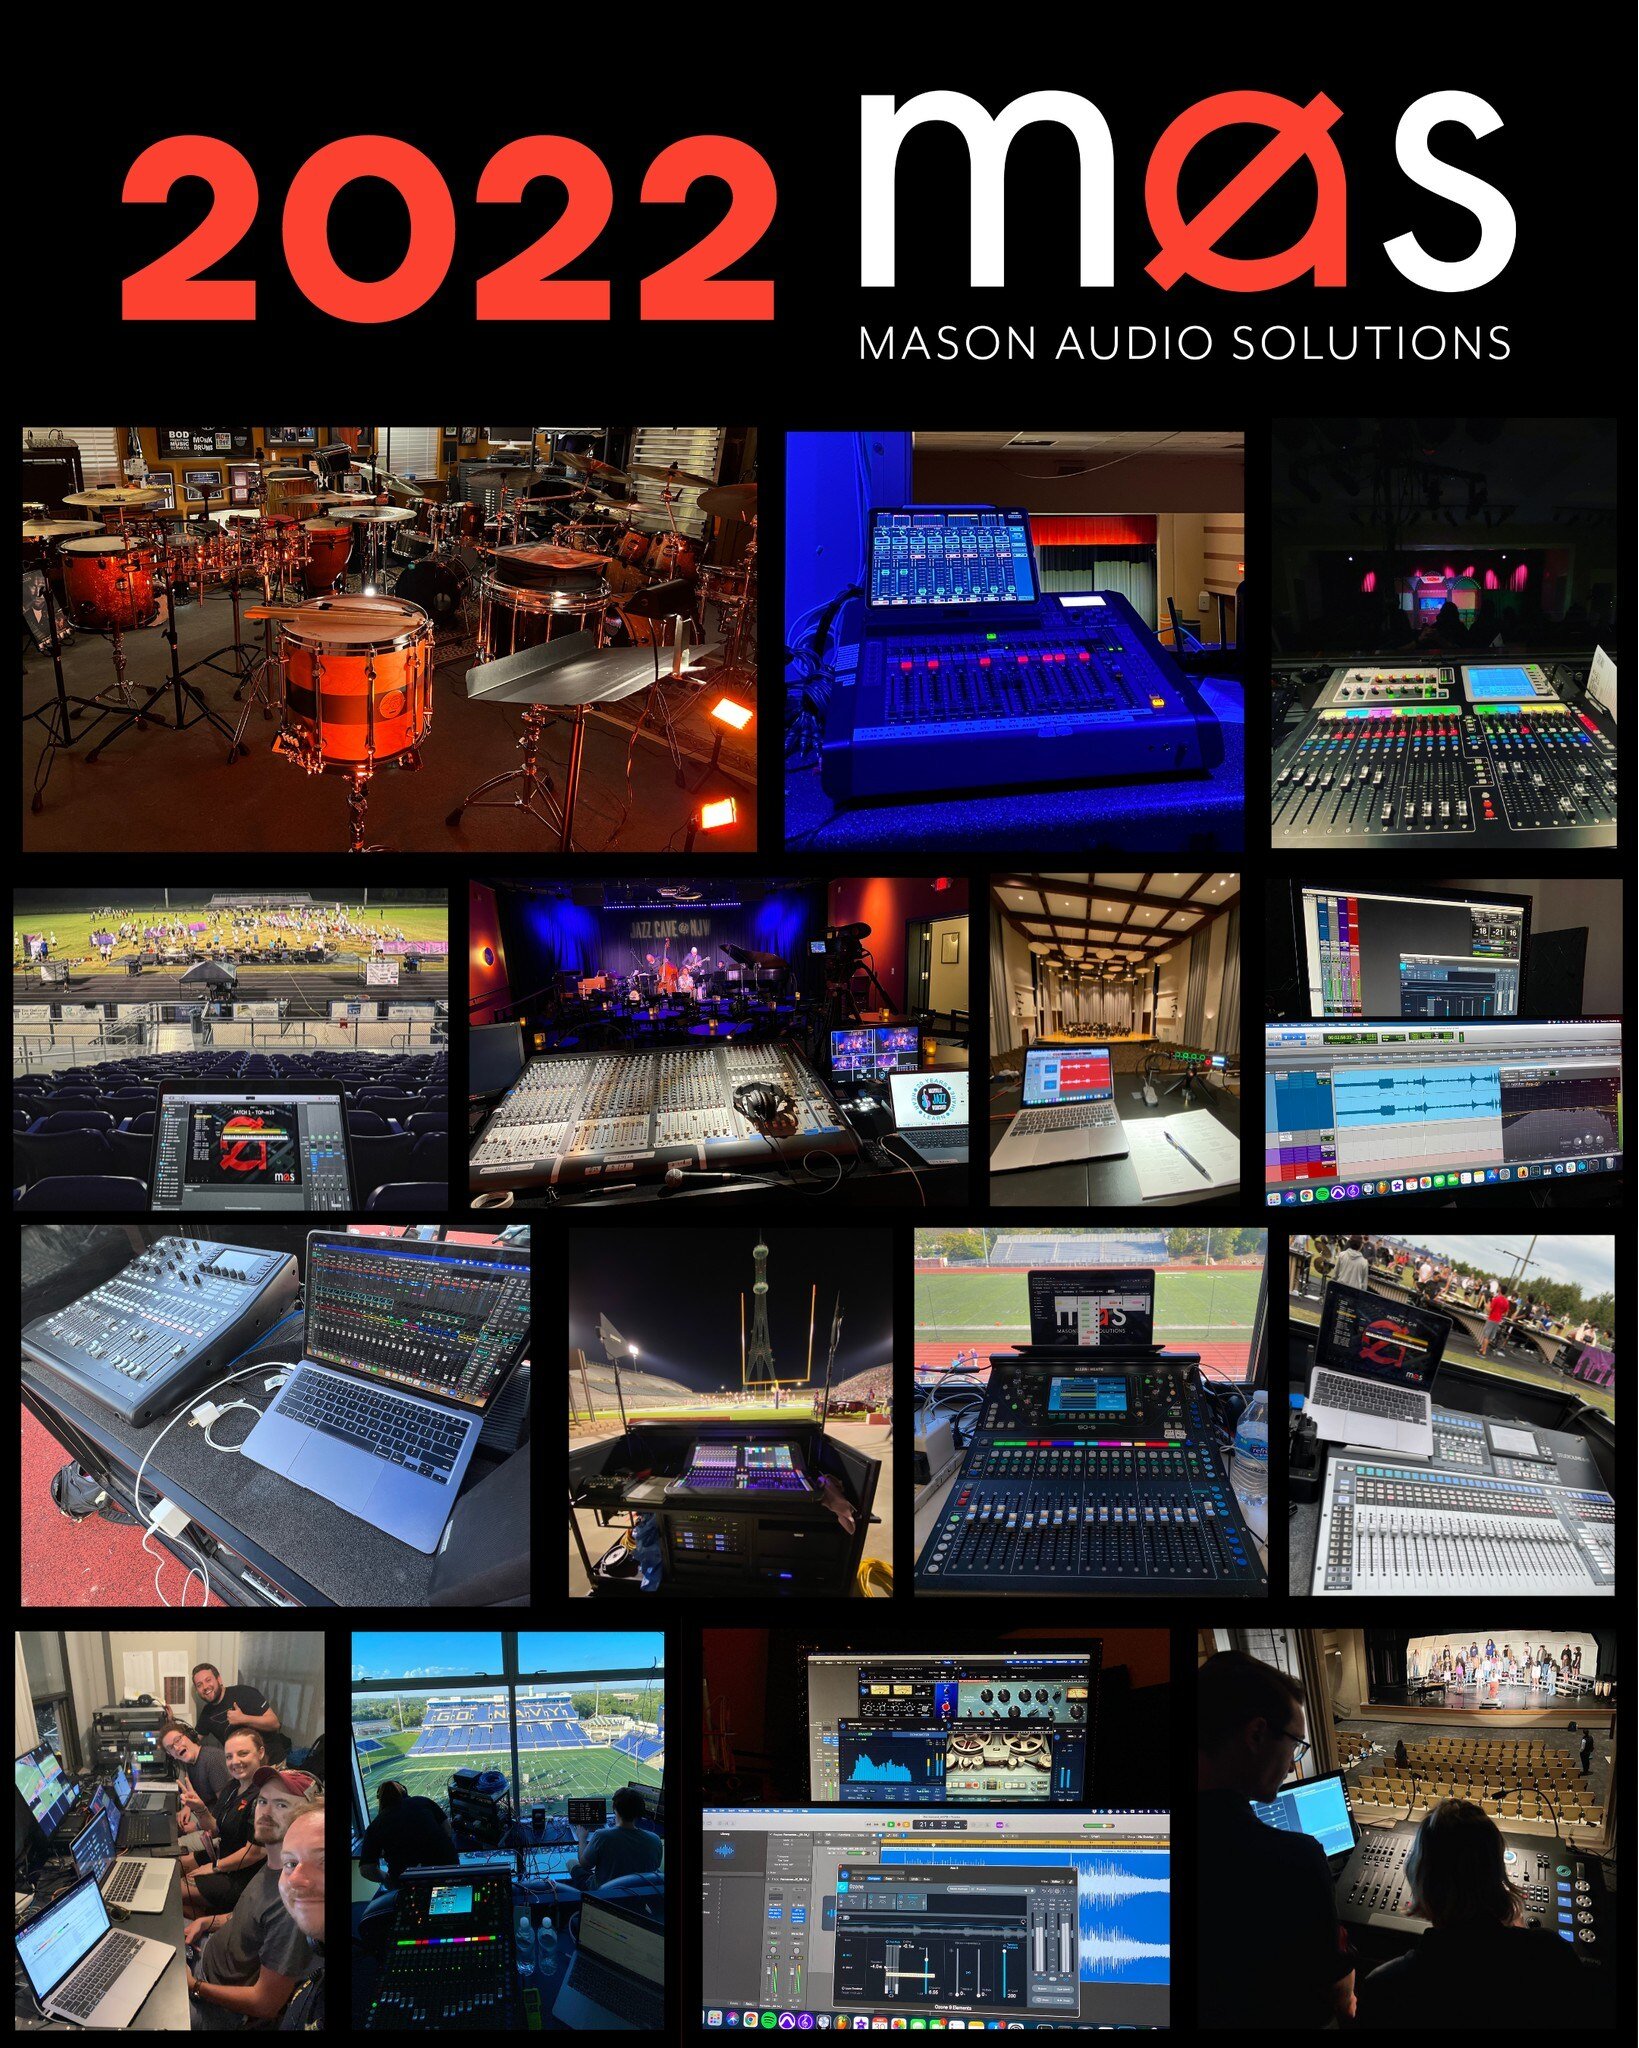 This year was the busiest yet for MAS! We're so thankful for the support of our clients and friends, and are looking forward to another great year in 2023!

https://masonaudiosol.com/
.
.
.
#MAS #masonaudiosolutions #audioengineer #mixingengineer #ma